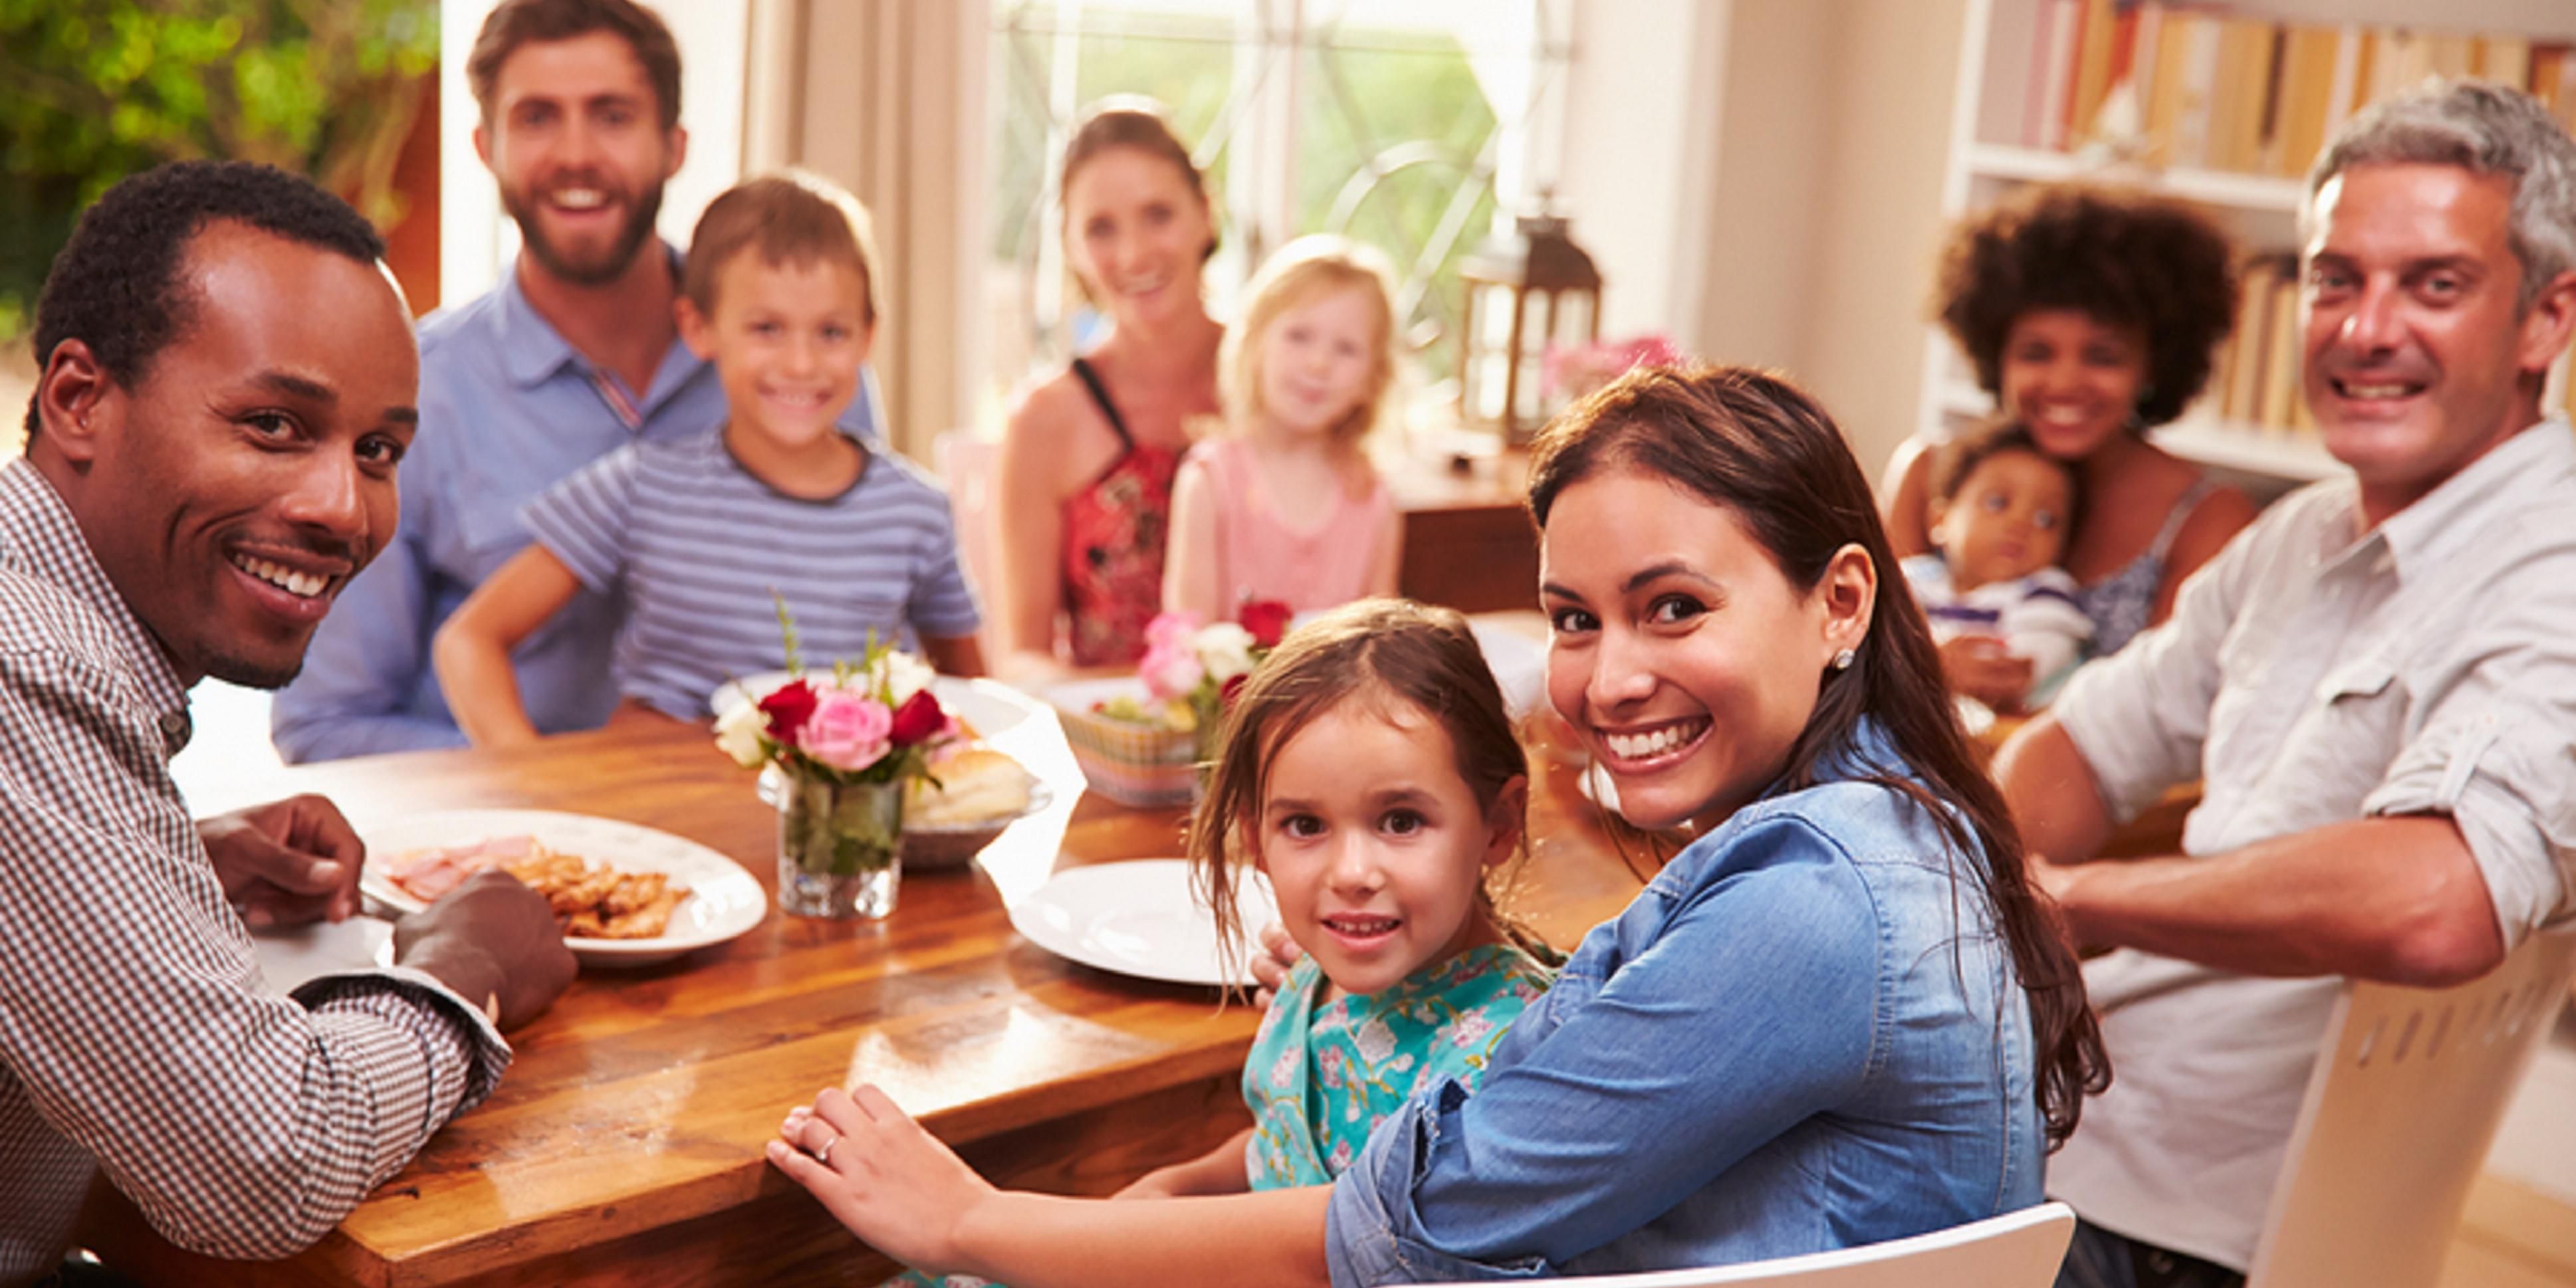 Do you have family coming in? Don't stuff your house with all those extra guests. We can be your spare bedroom, and we promise to take care of your family as if they were our family and we'll even give them free breakfast in the morning.